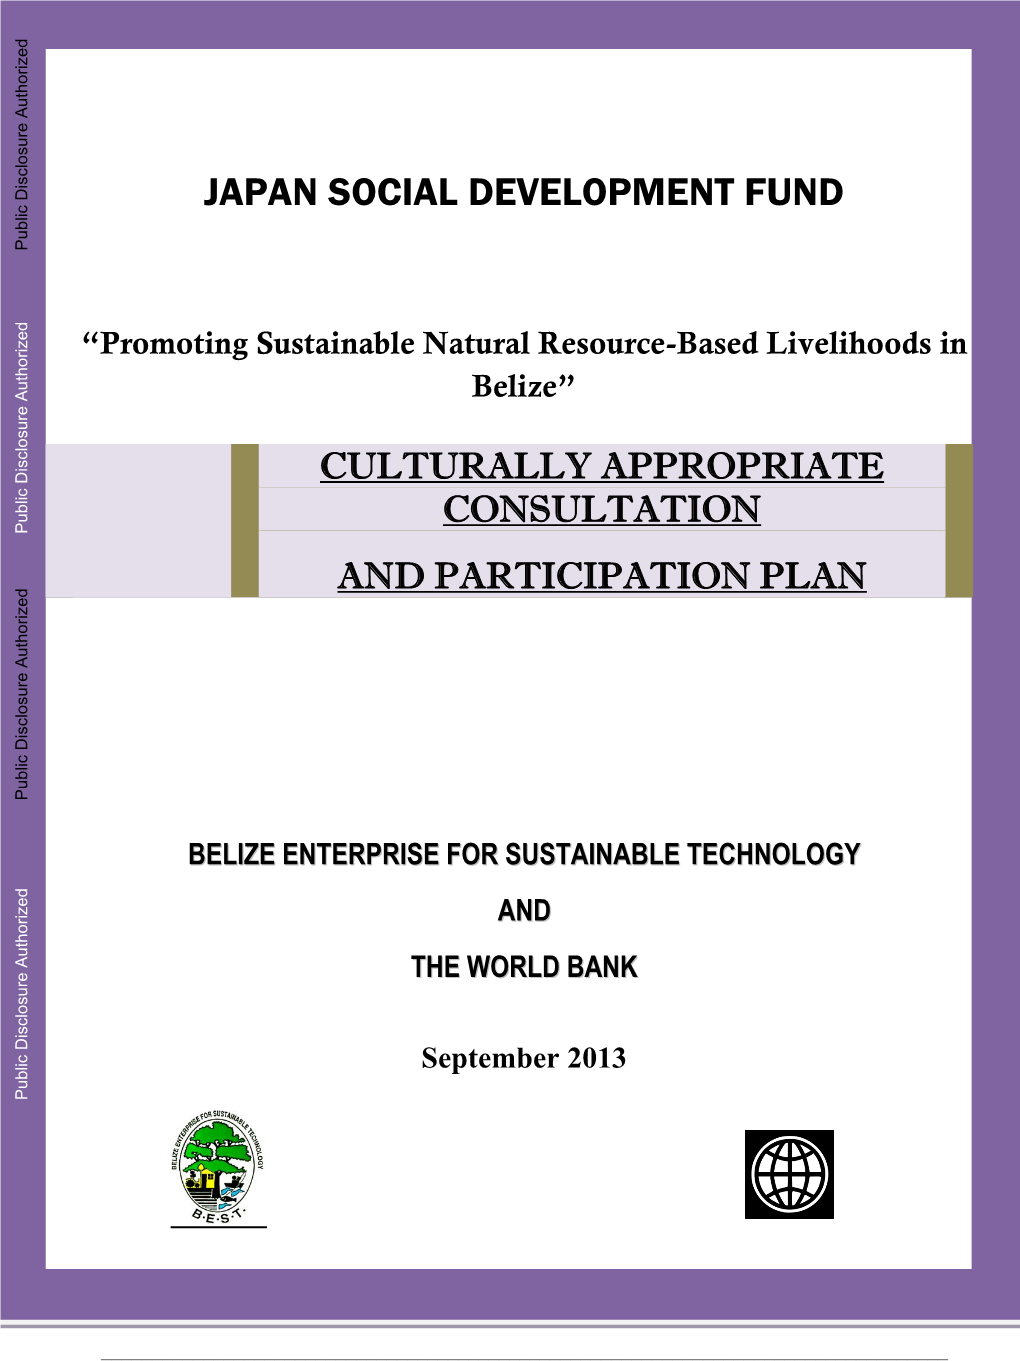 JAPAN SOCIAL DEVELOPMENT FUND Public Disclosure Authorized “Promoting Sustainable Natural Resource-Based Livelihoods in Belize”